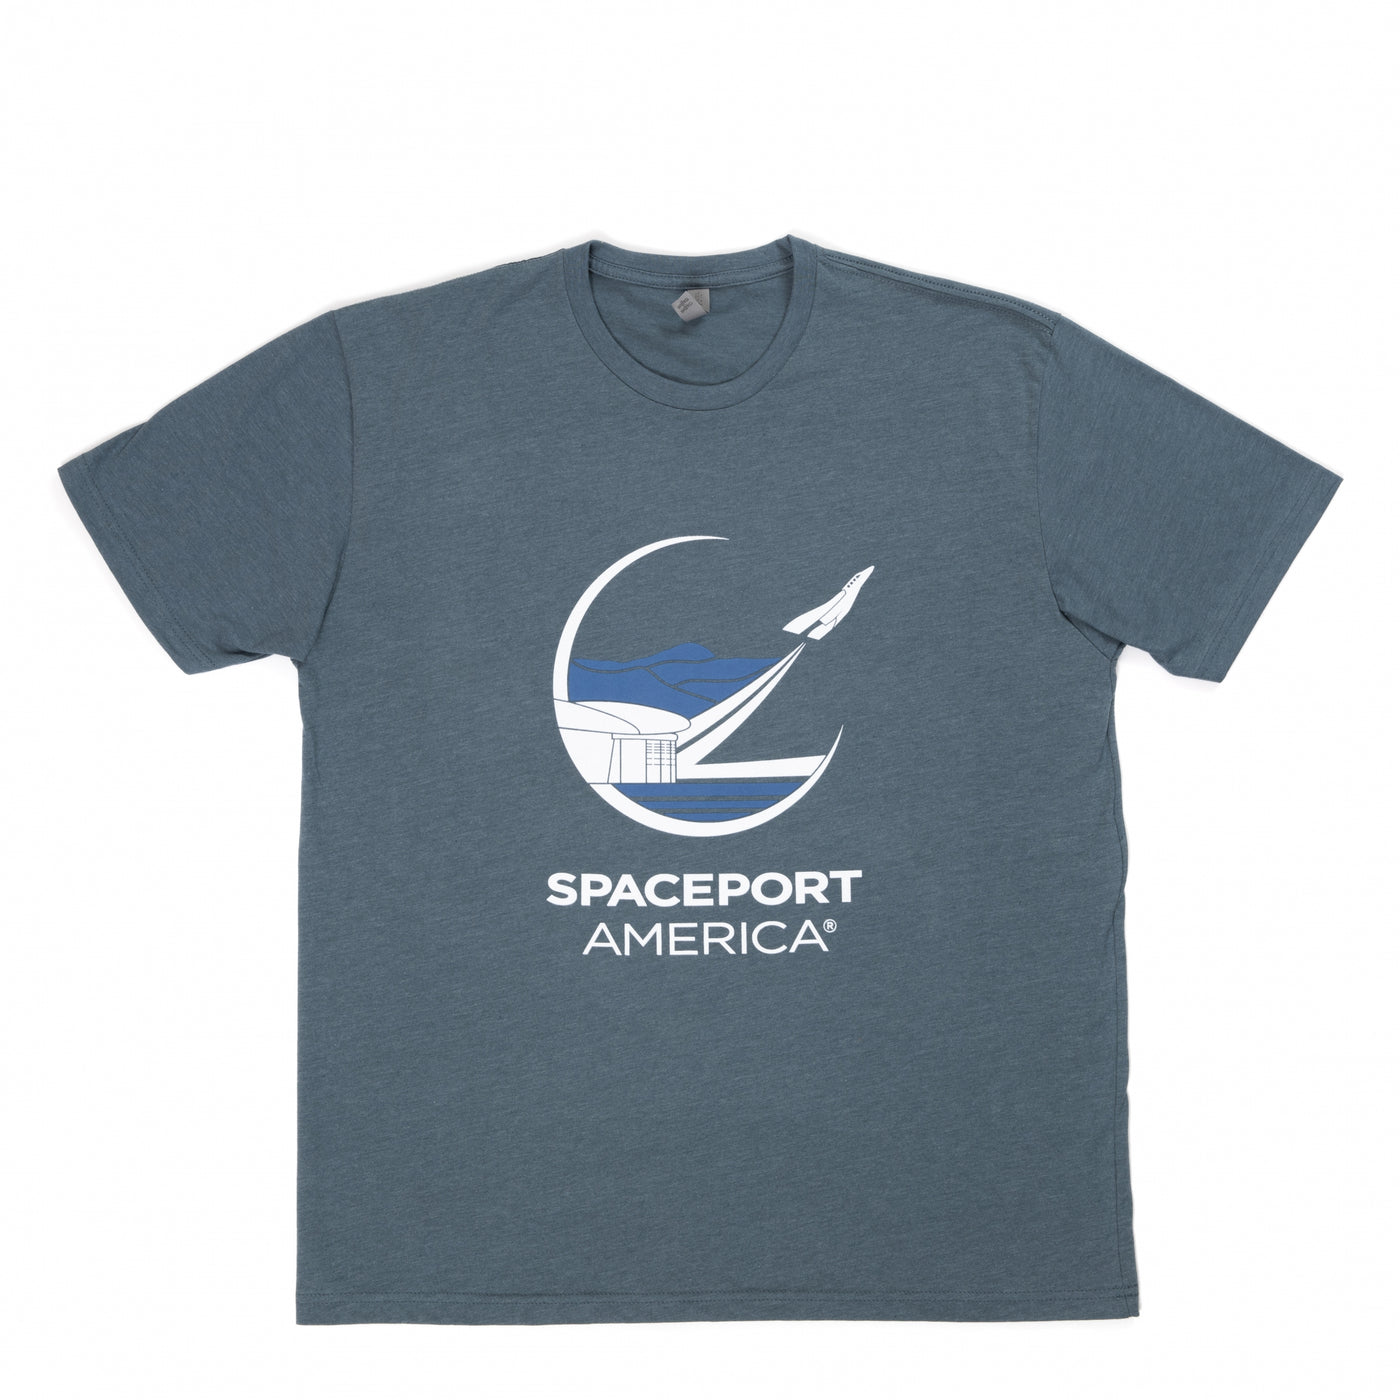 Spaceport America Next Level Official Horizontal Launch T-Shirt